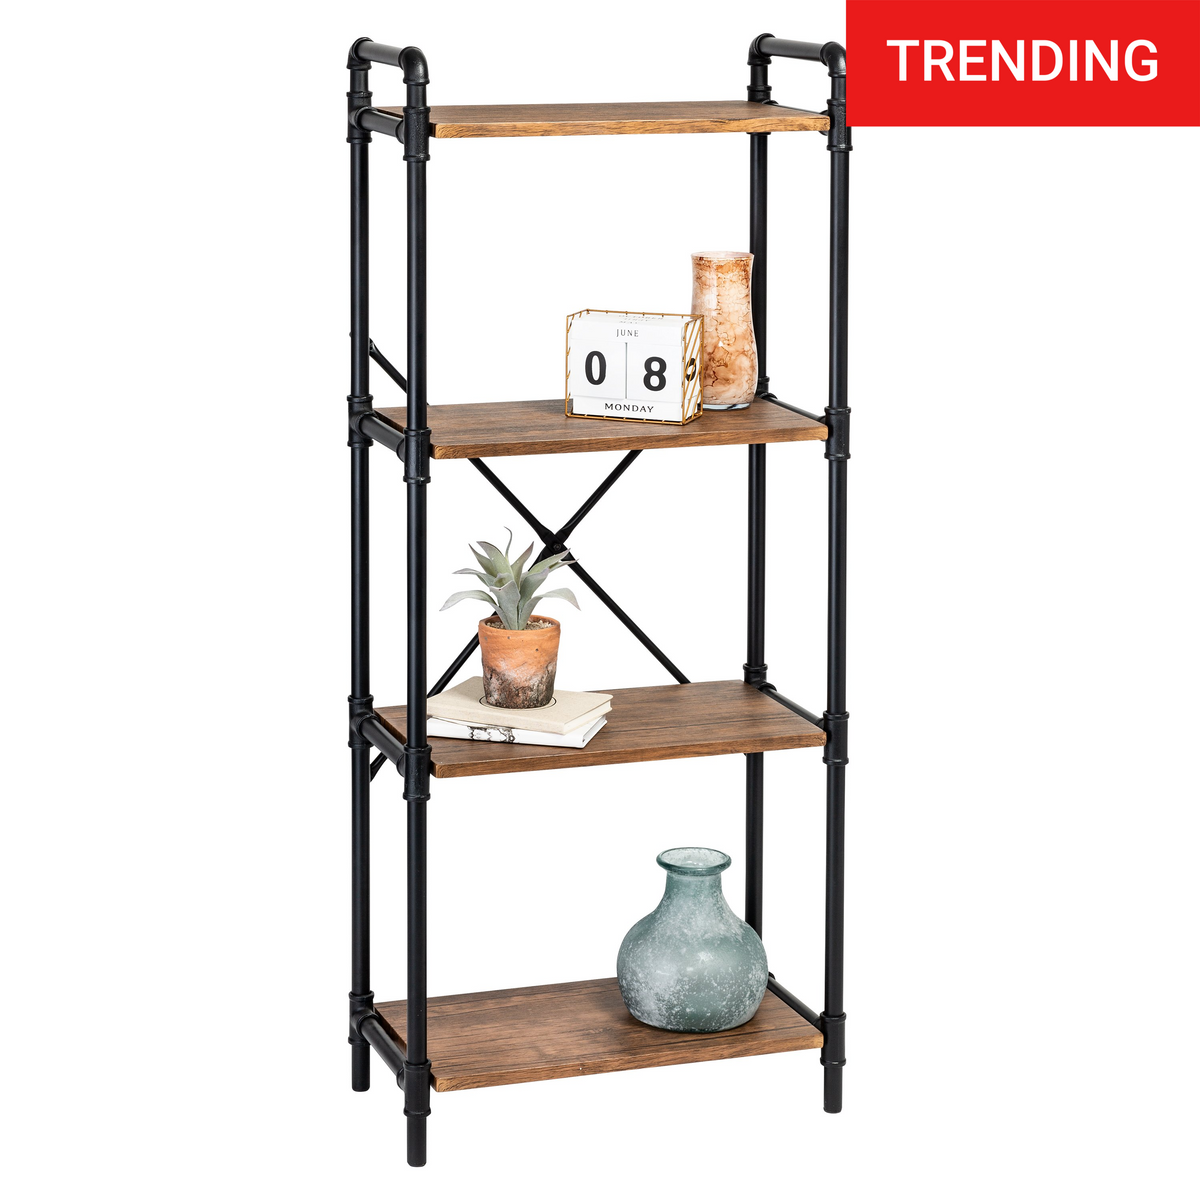 Honey-Can-Do 4-Shelf Steel and MDF Rolling Storage Bookshelf, Black/Rustic  Brown, Holds up to 50 lb per Shelf